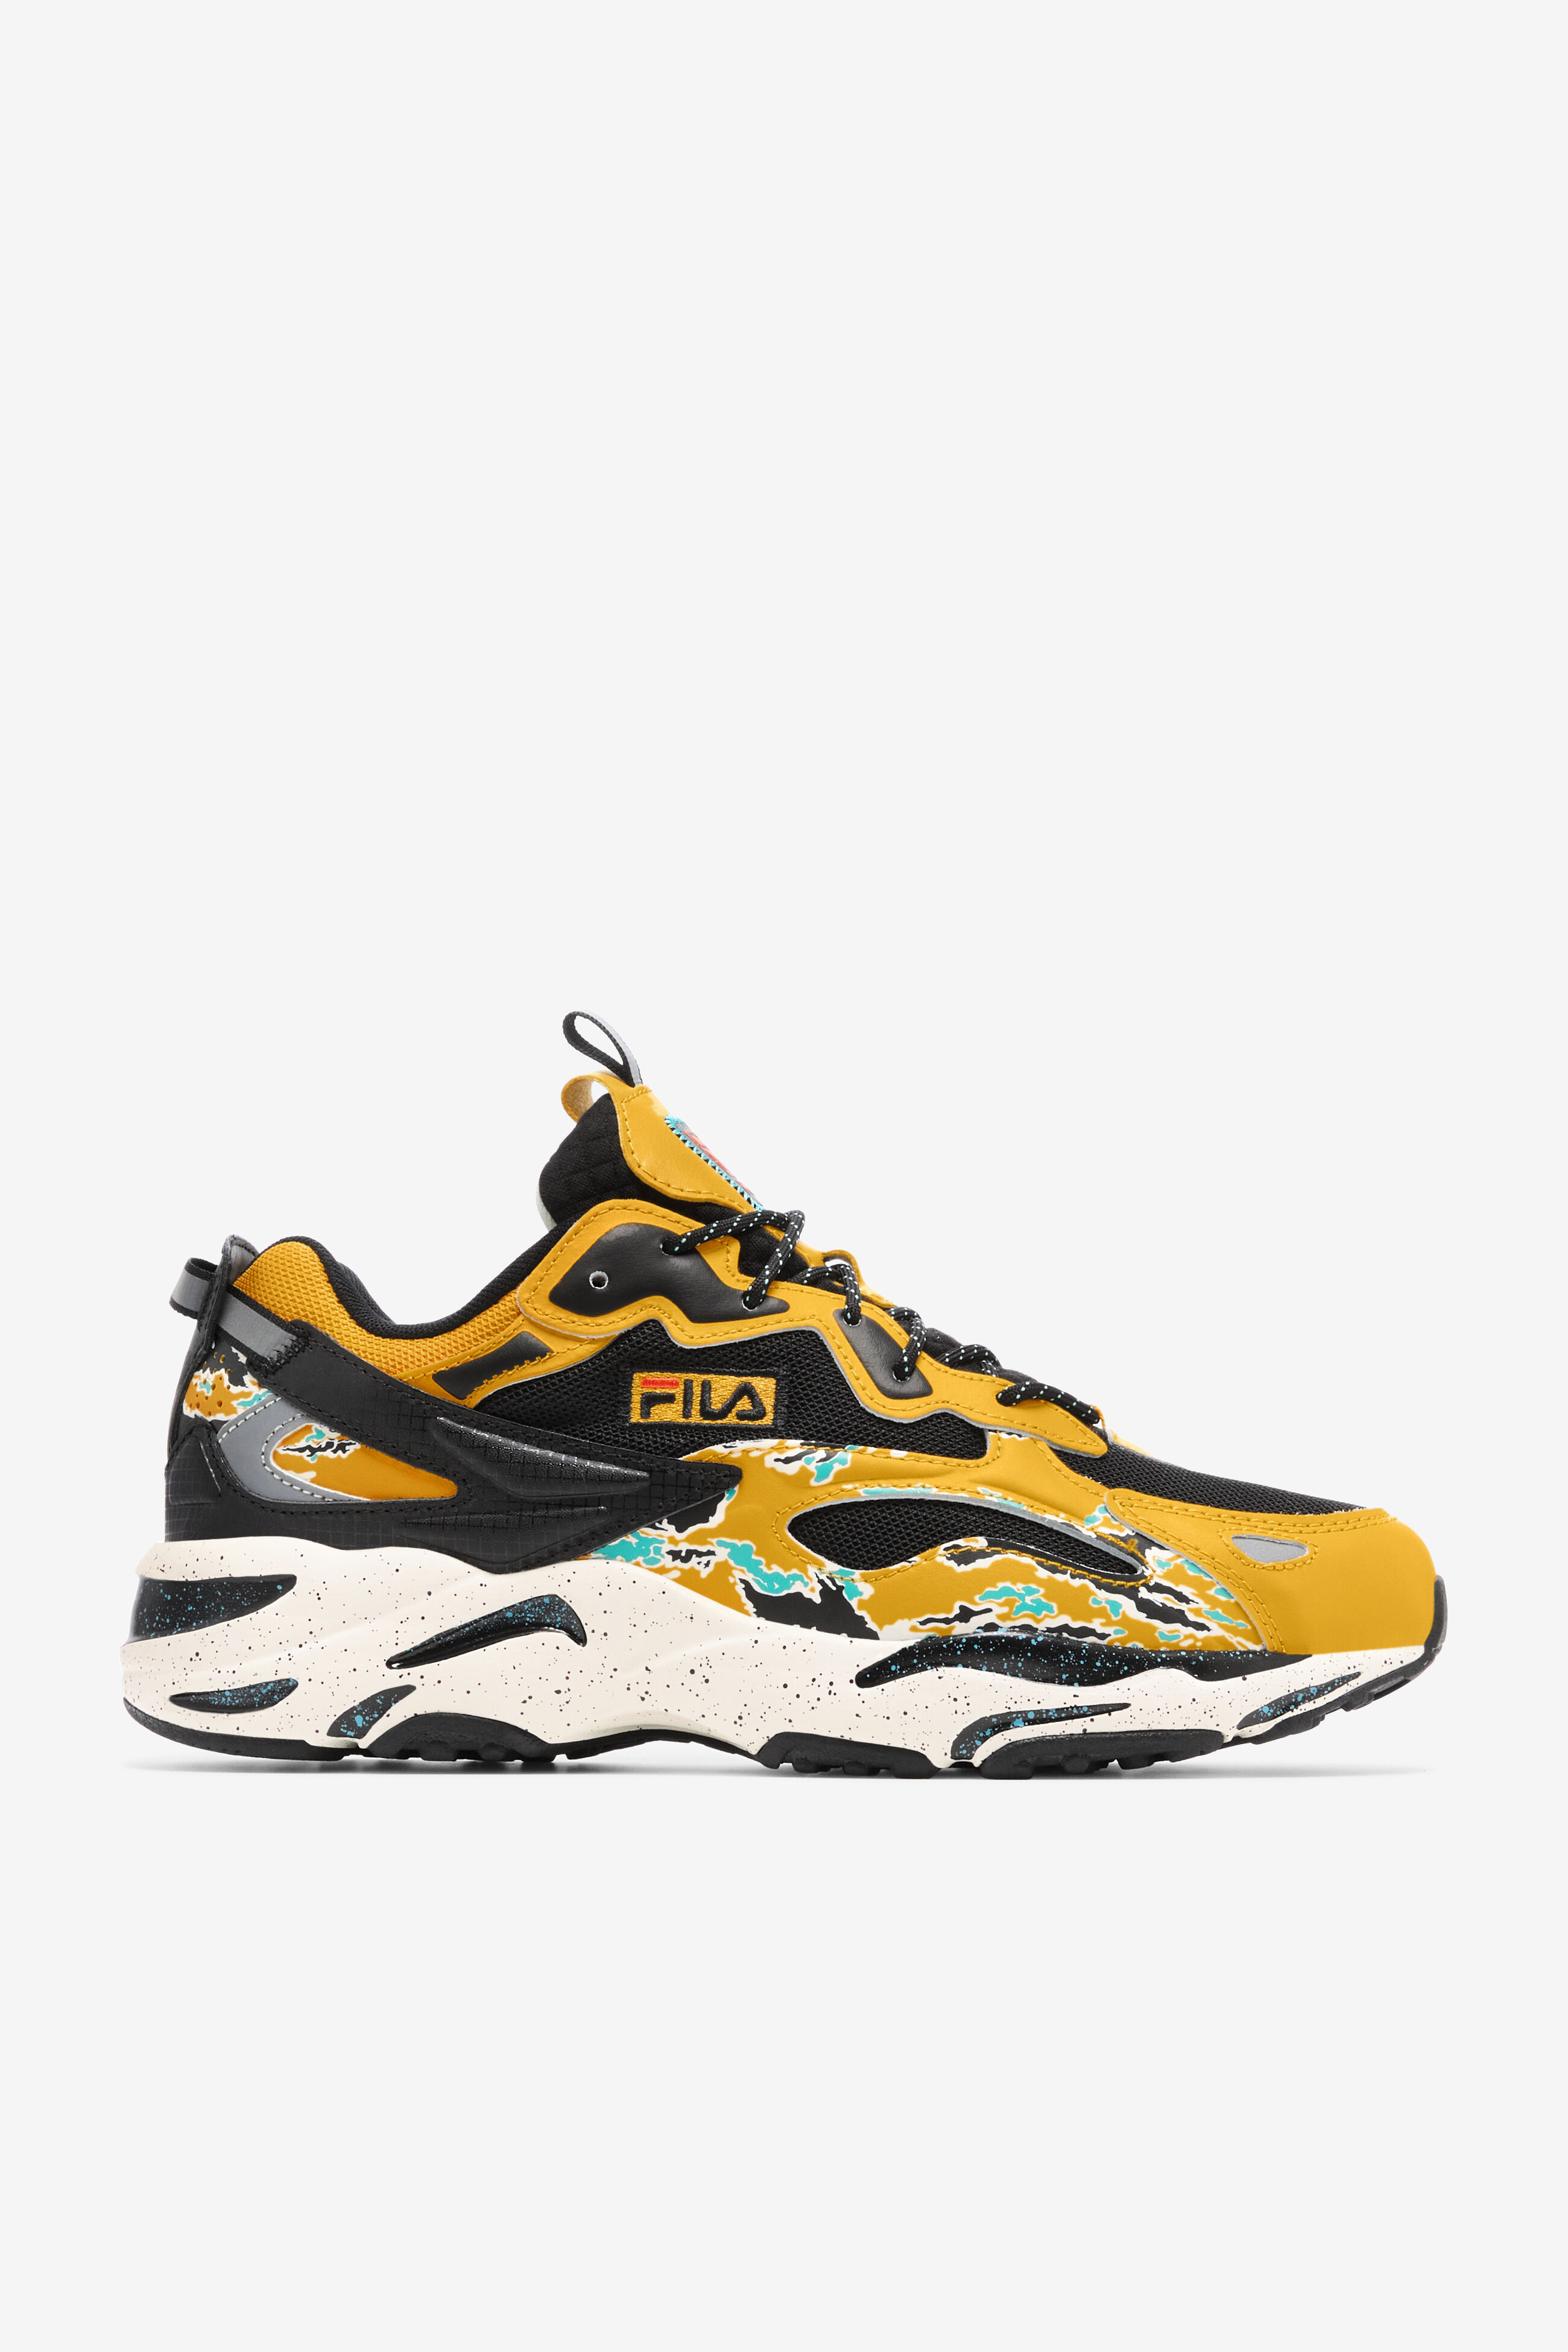 Men's Ray Tracer Apex - Sneakers & Lifestyle | Fila 791273795044